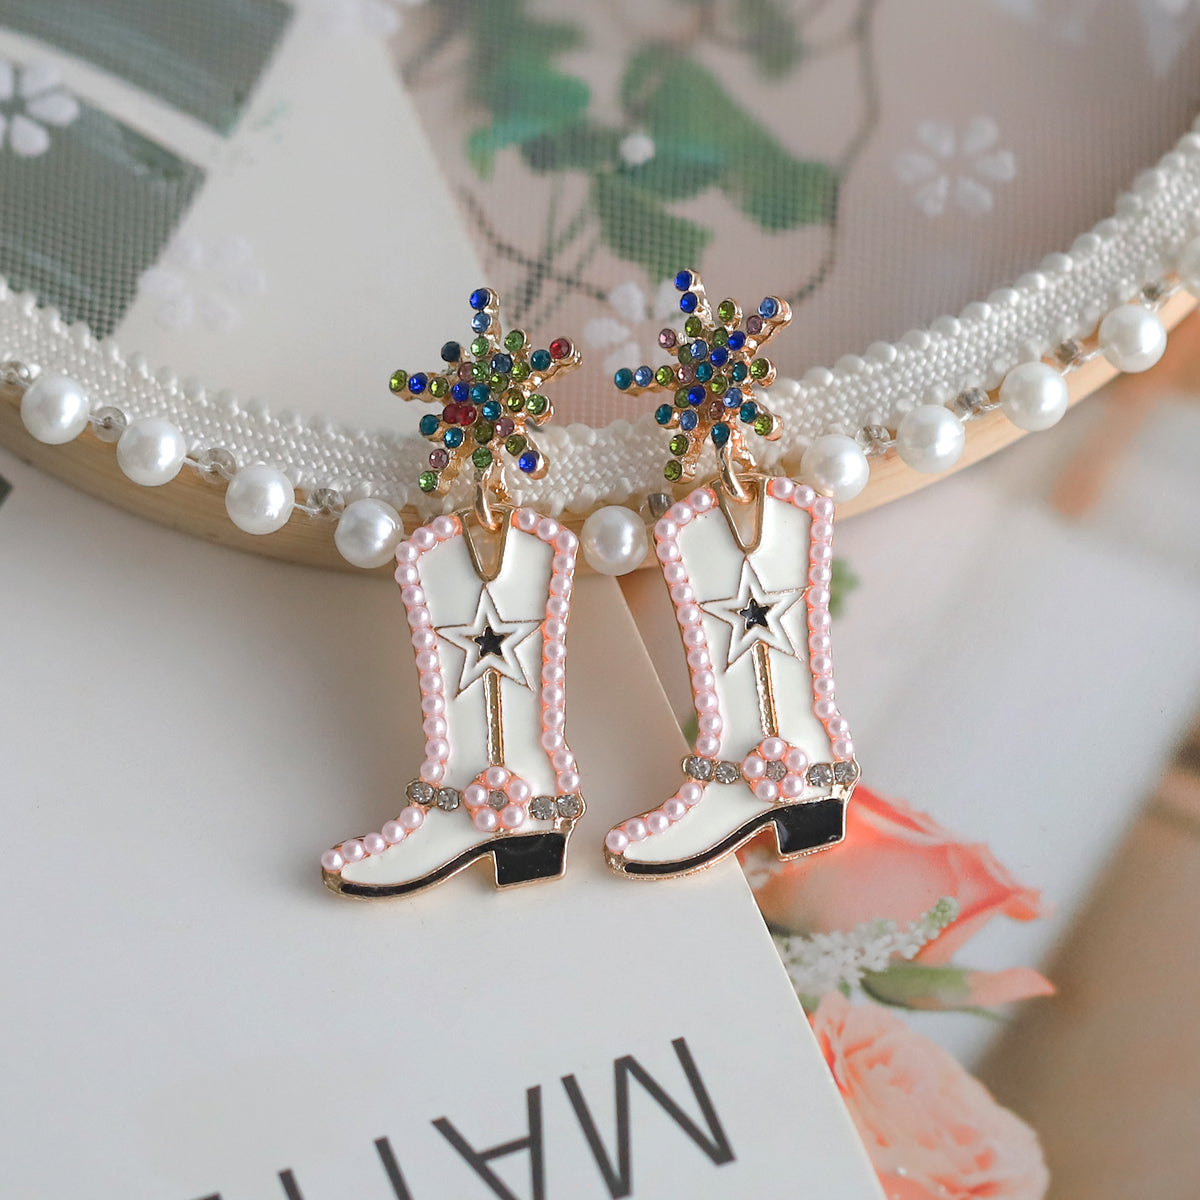 1 pair cowboy style boots inlay alloy artificial gemstones drop earrings